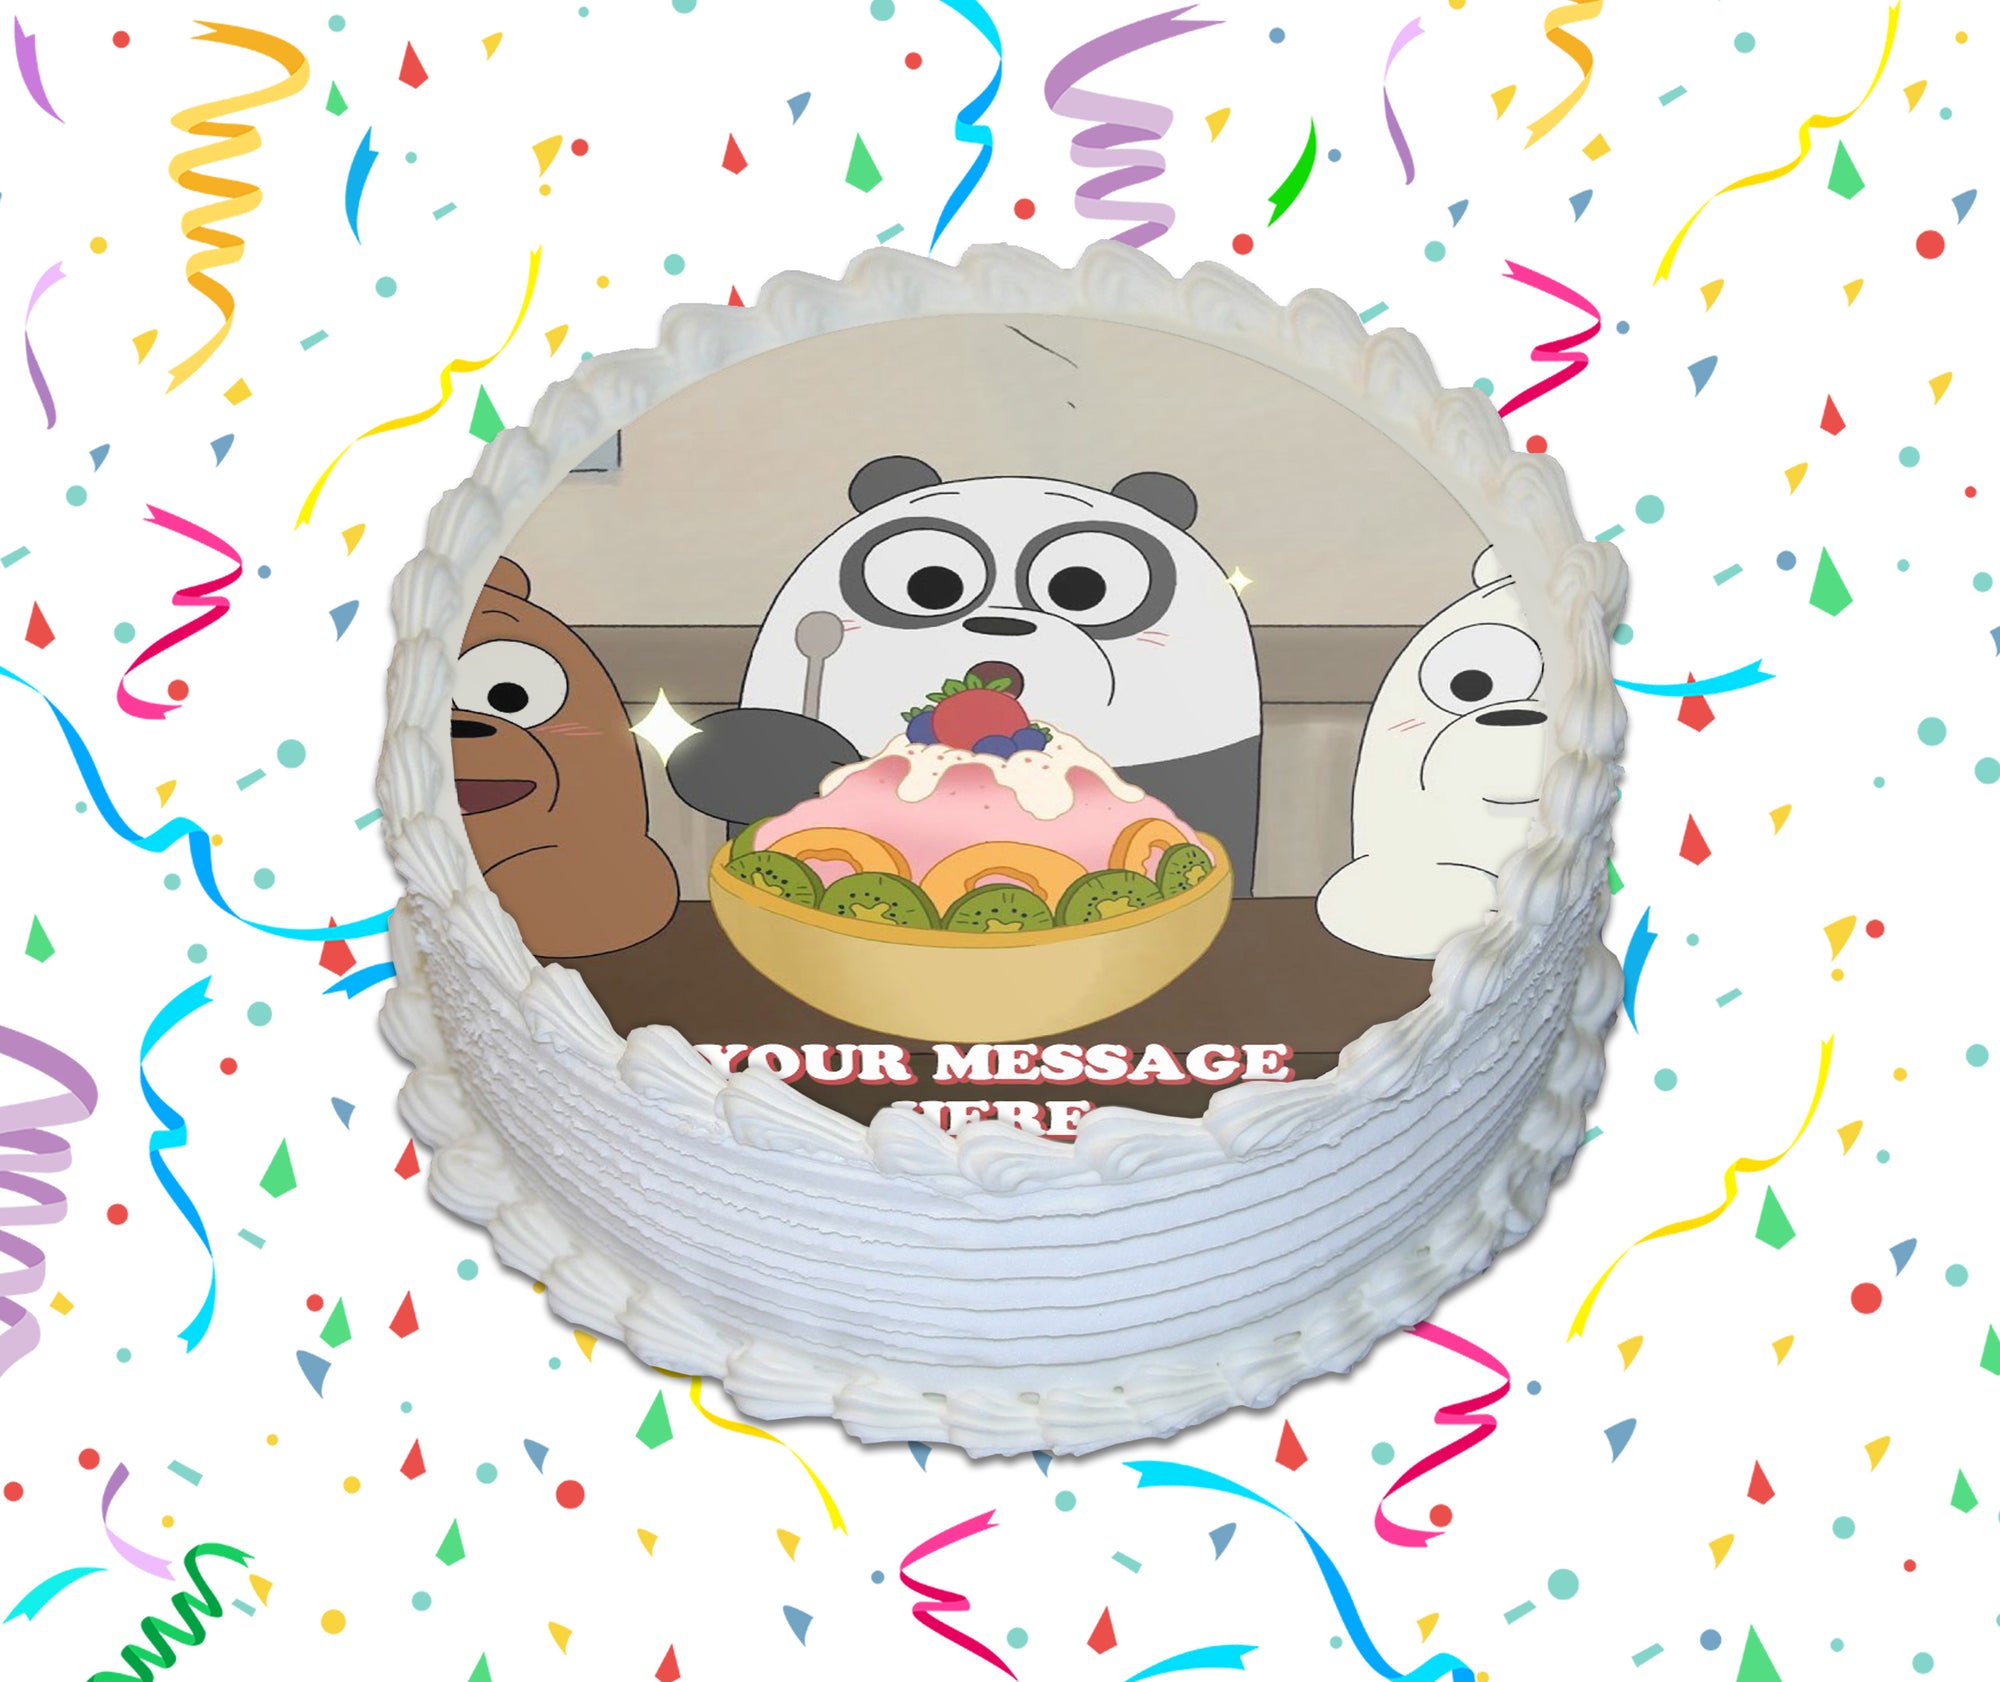 We Bare Bears Edible Image Cake Topper Personalized Birthday Sheet Cus - PartyCreationz